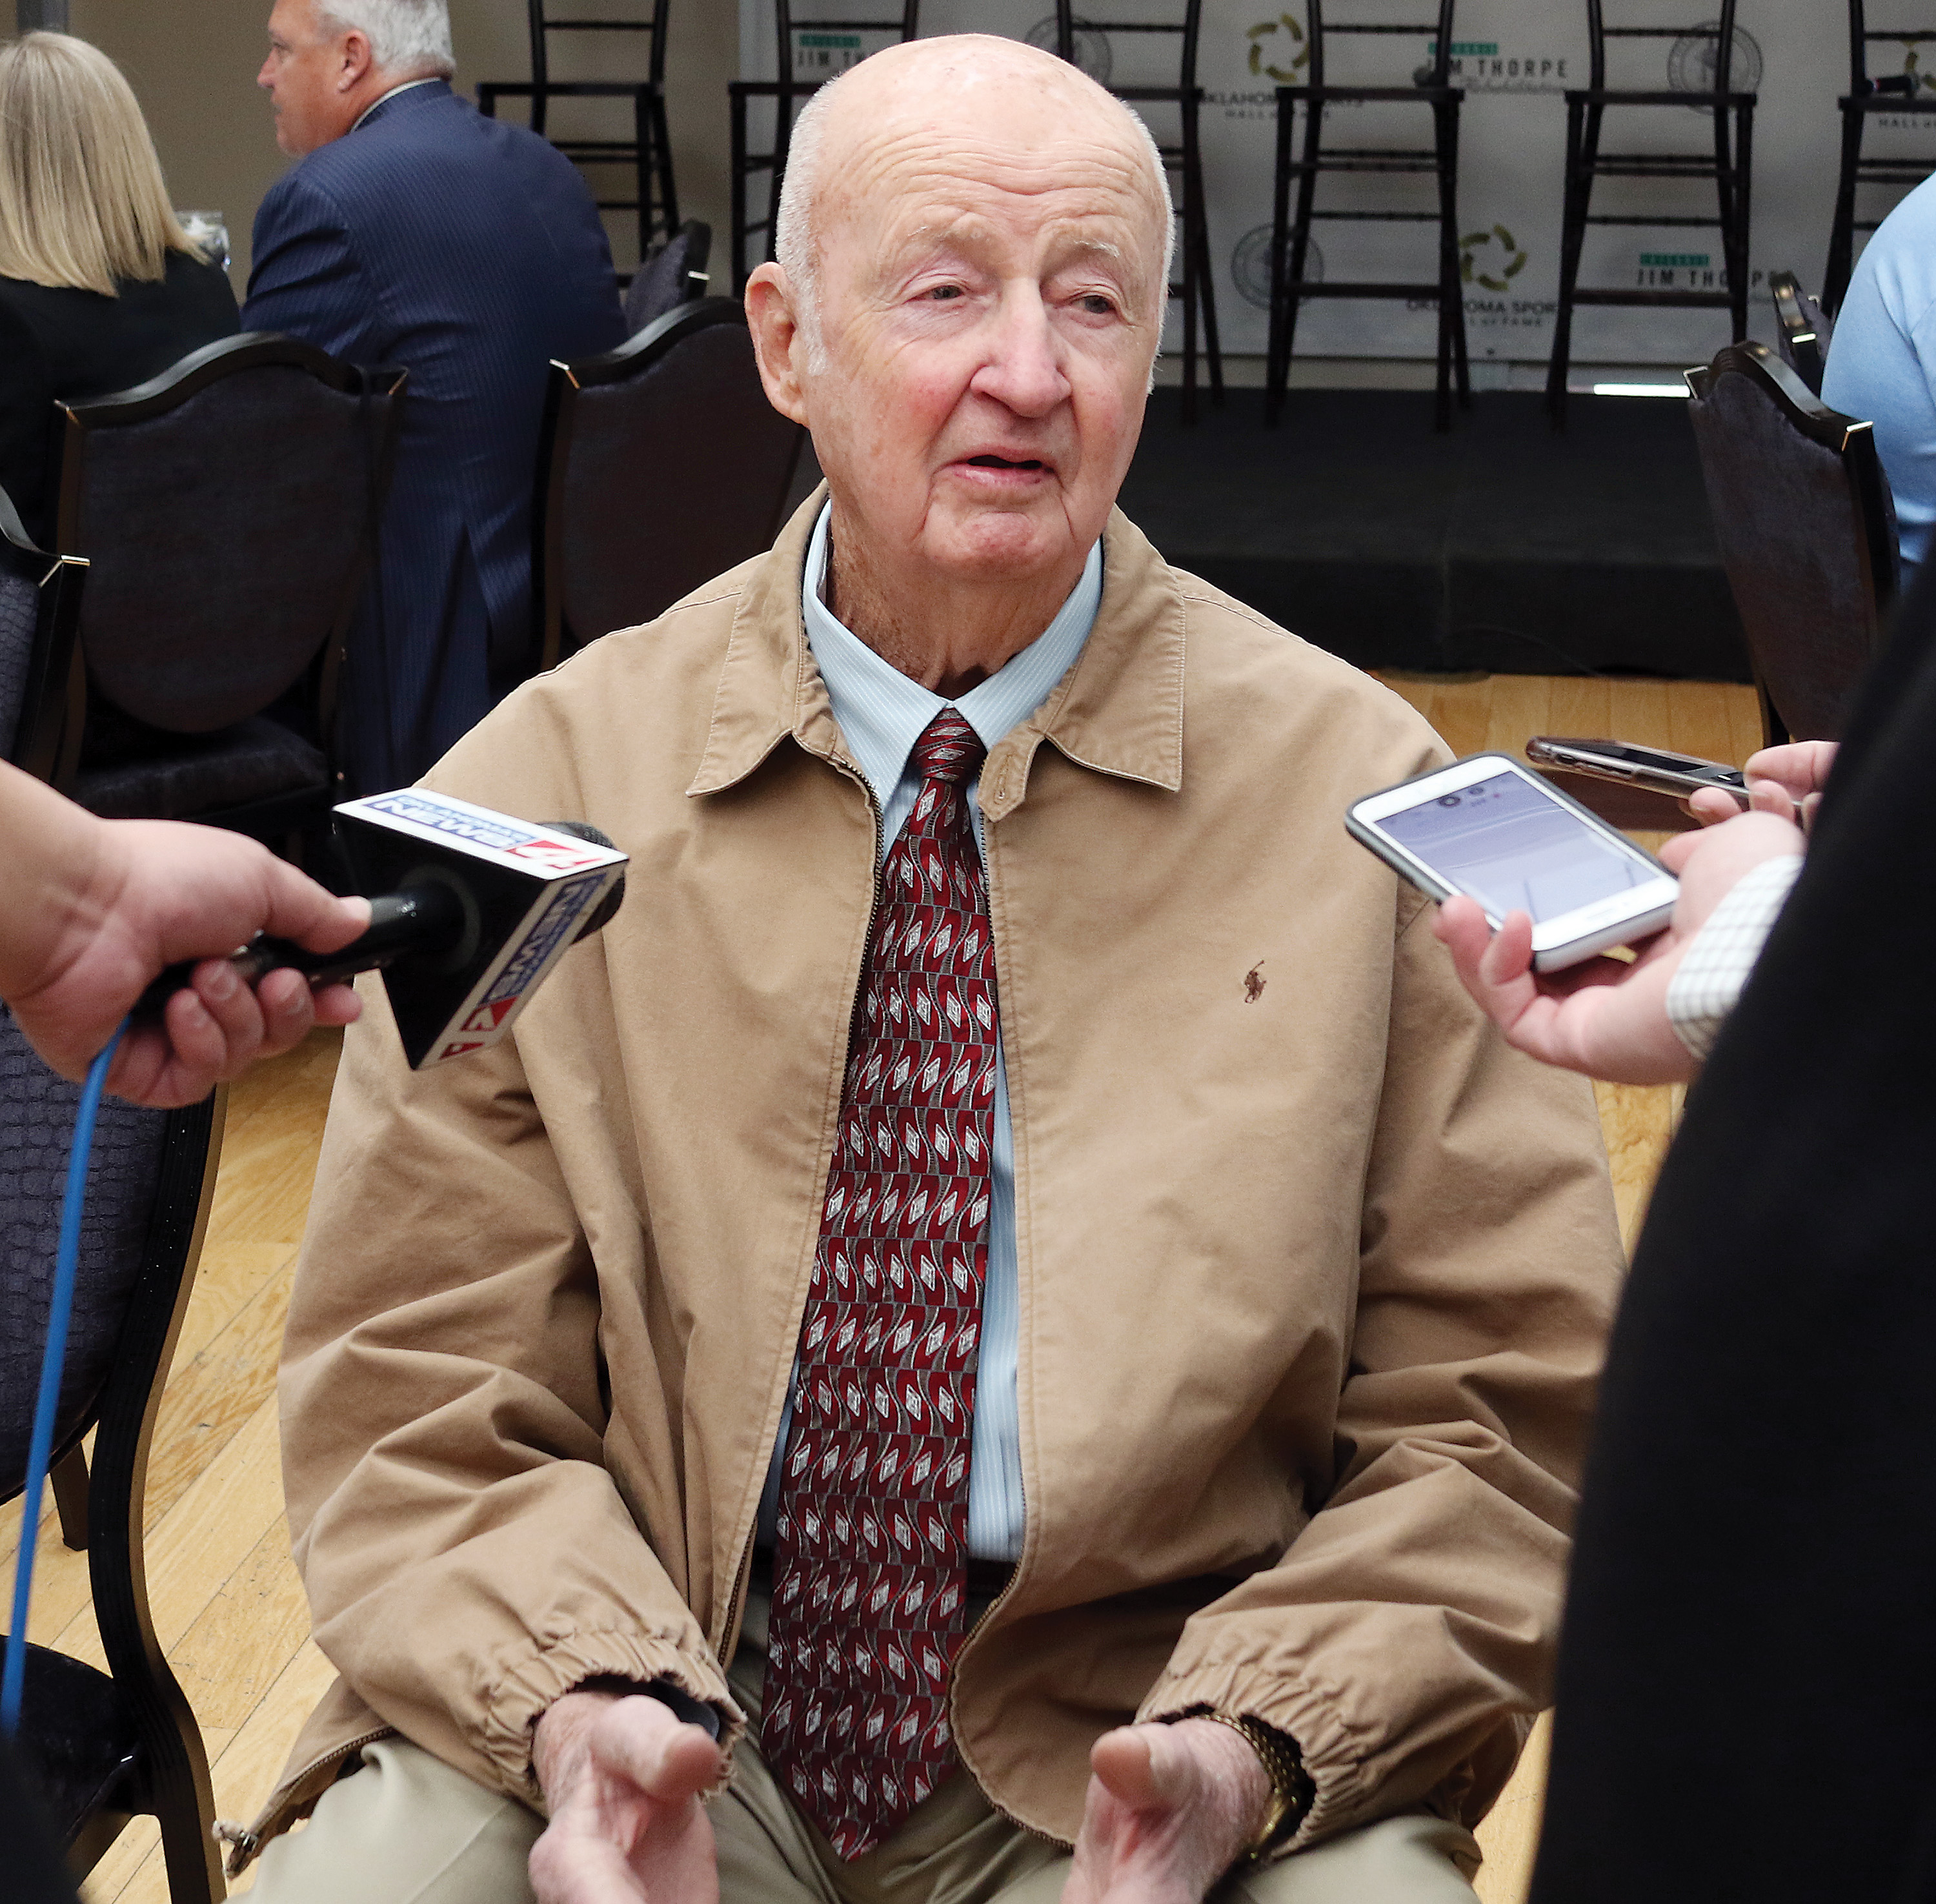 Reed speaks with reporters about being named to the Hall of Fame. (Tribune photographer/Glen Miller)